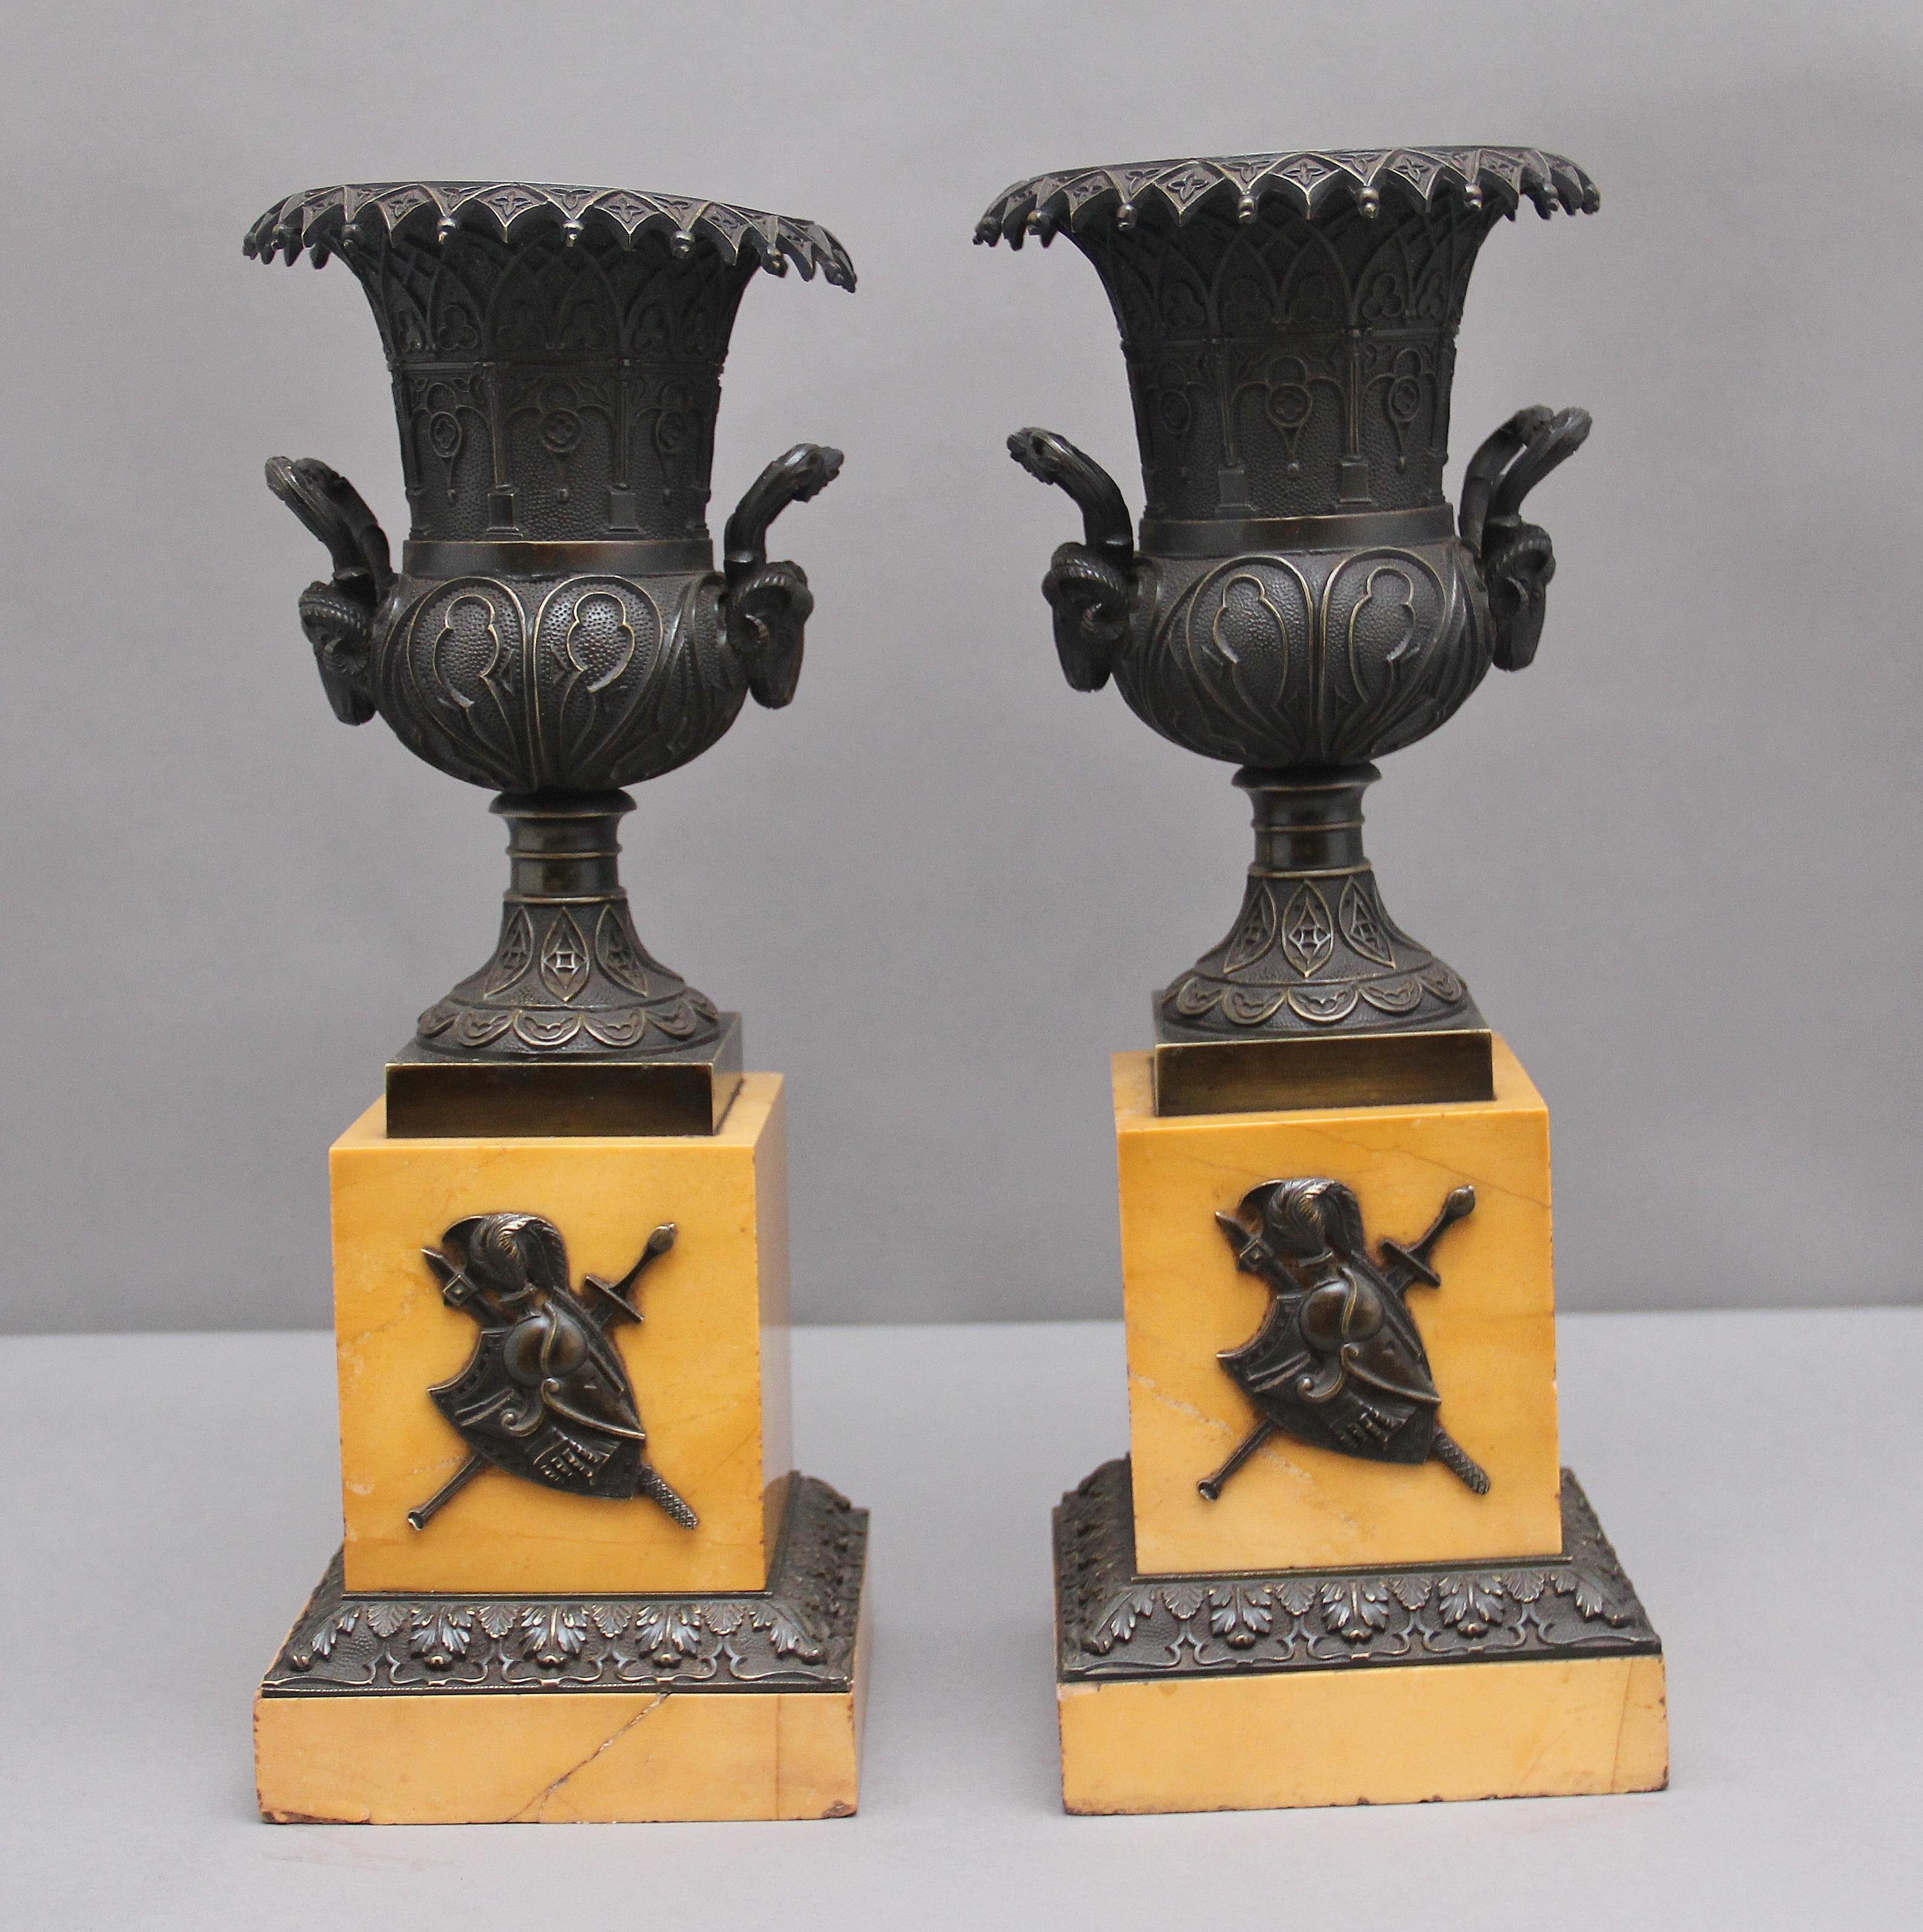 A pair of French early 19th century bronze urns on marble bases, the bronze engraved urns having wonderful intricate detail including rams head handles at either side of each urn, sitting on square column marble bases decorated with a coat of arms,